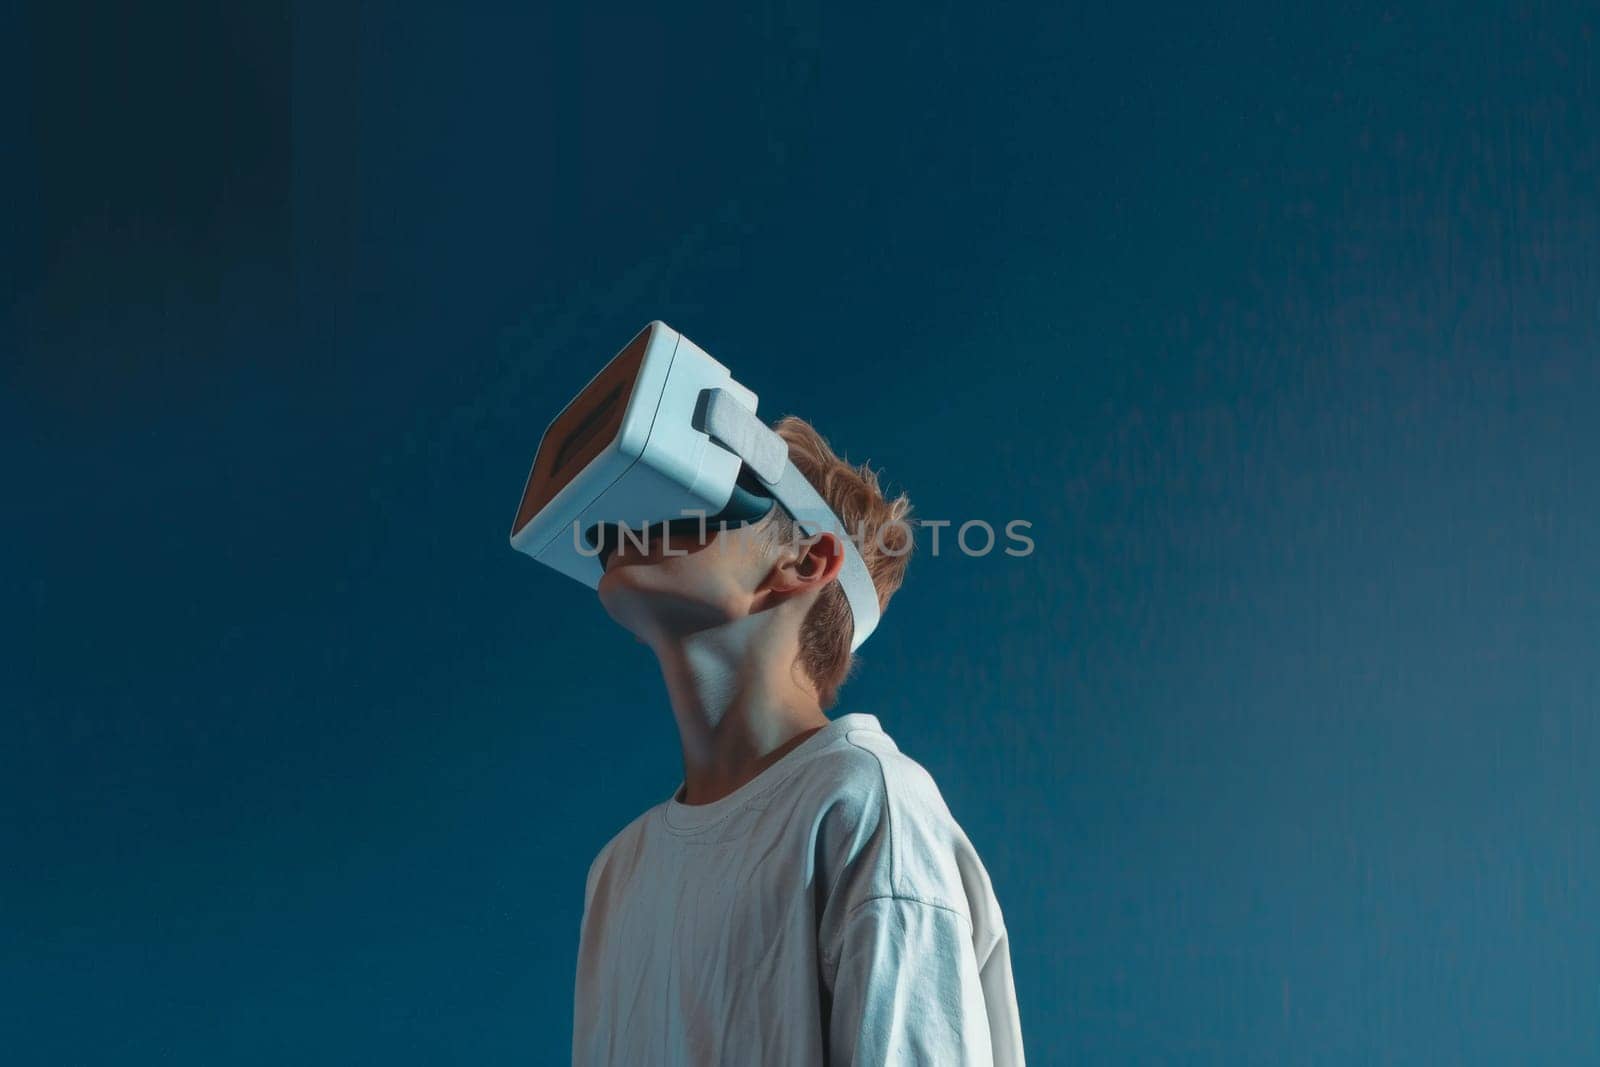 A young man wearing a white shirt and a white virtual reality headset. Concept of excitement and adventure as the man prepares to explore a new virtual world